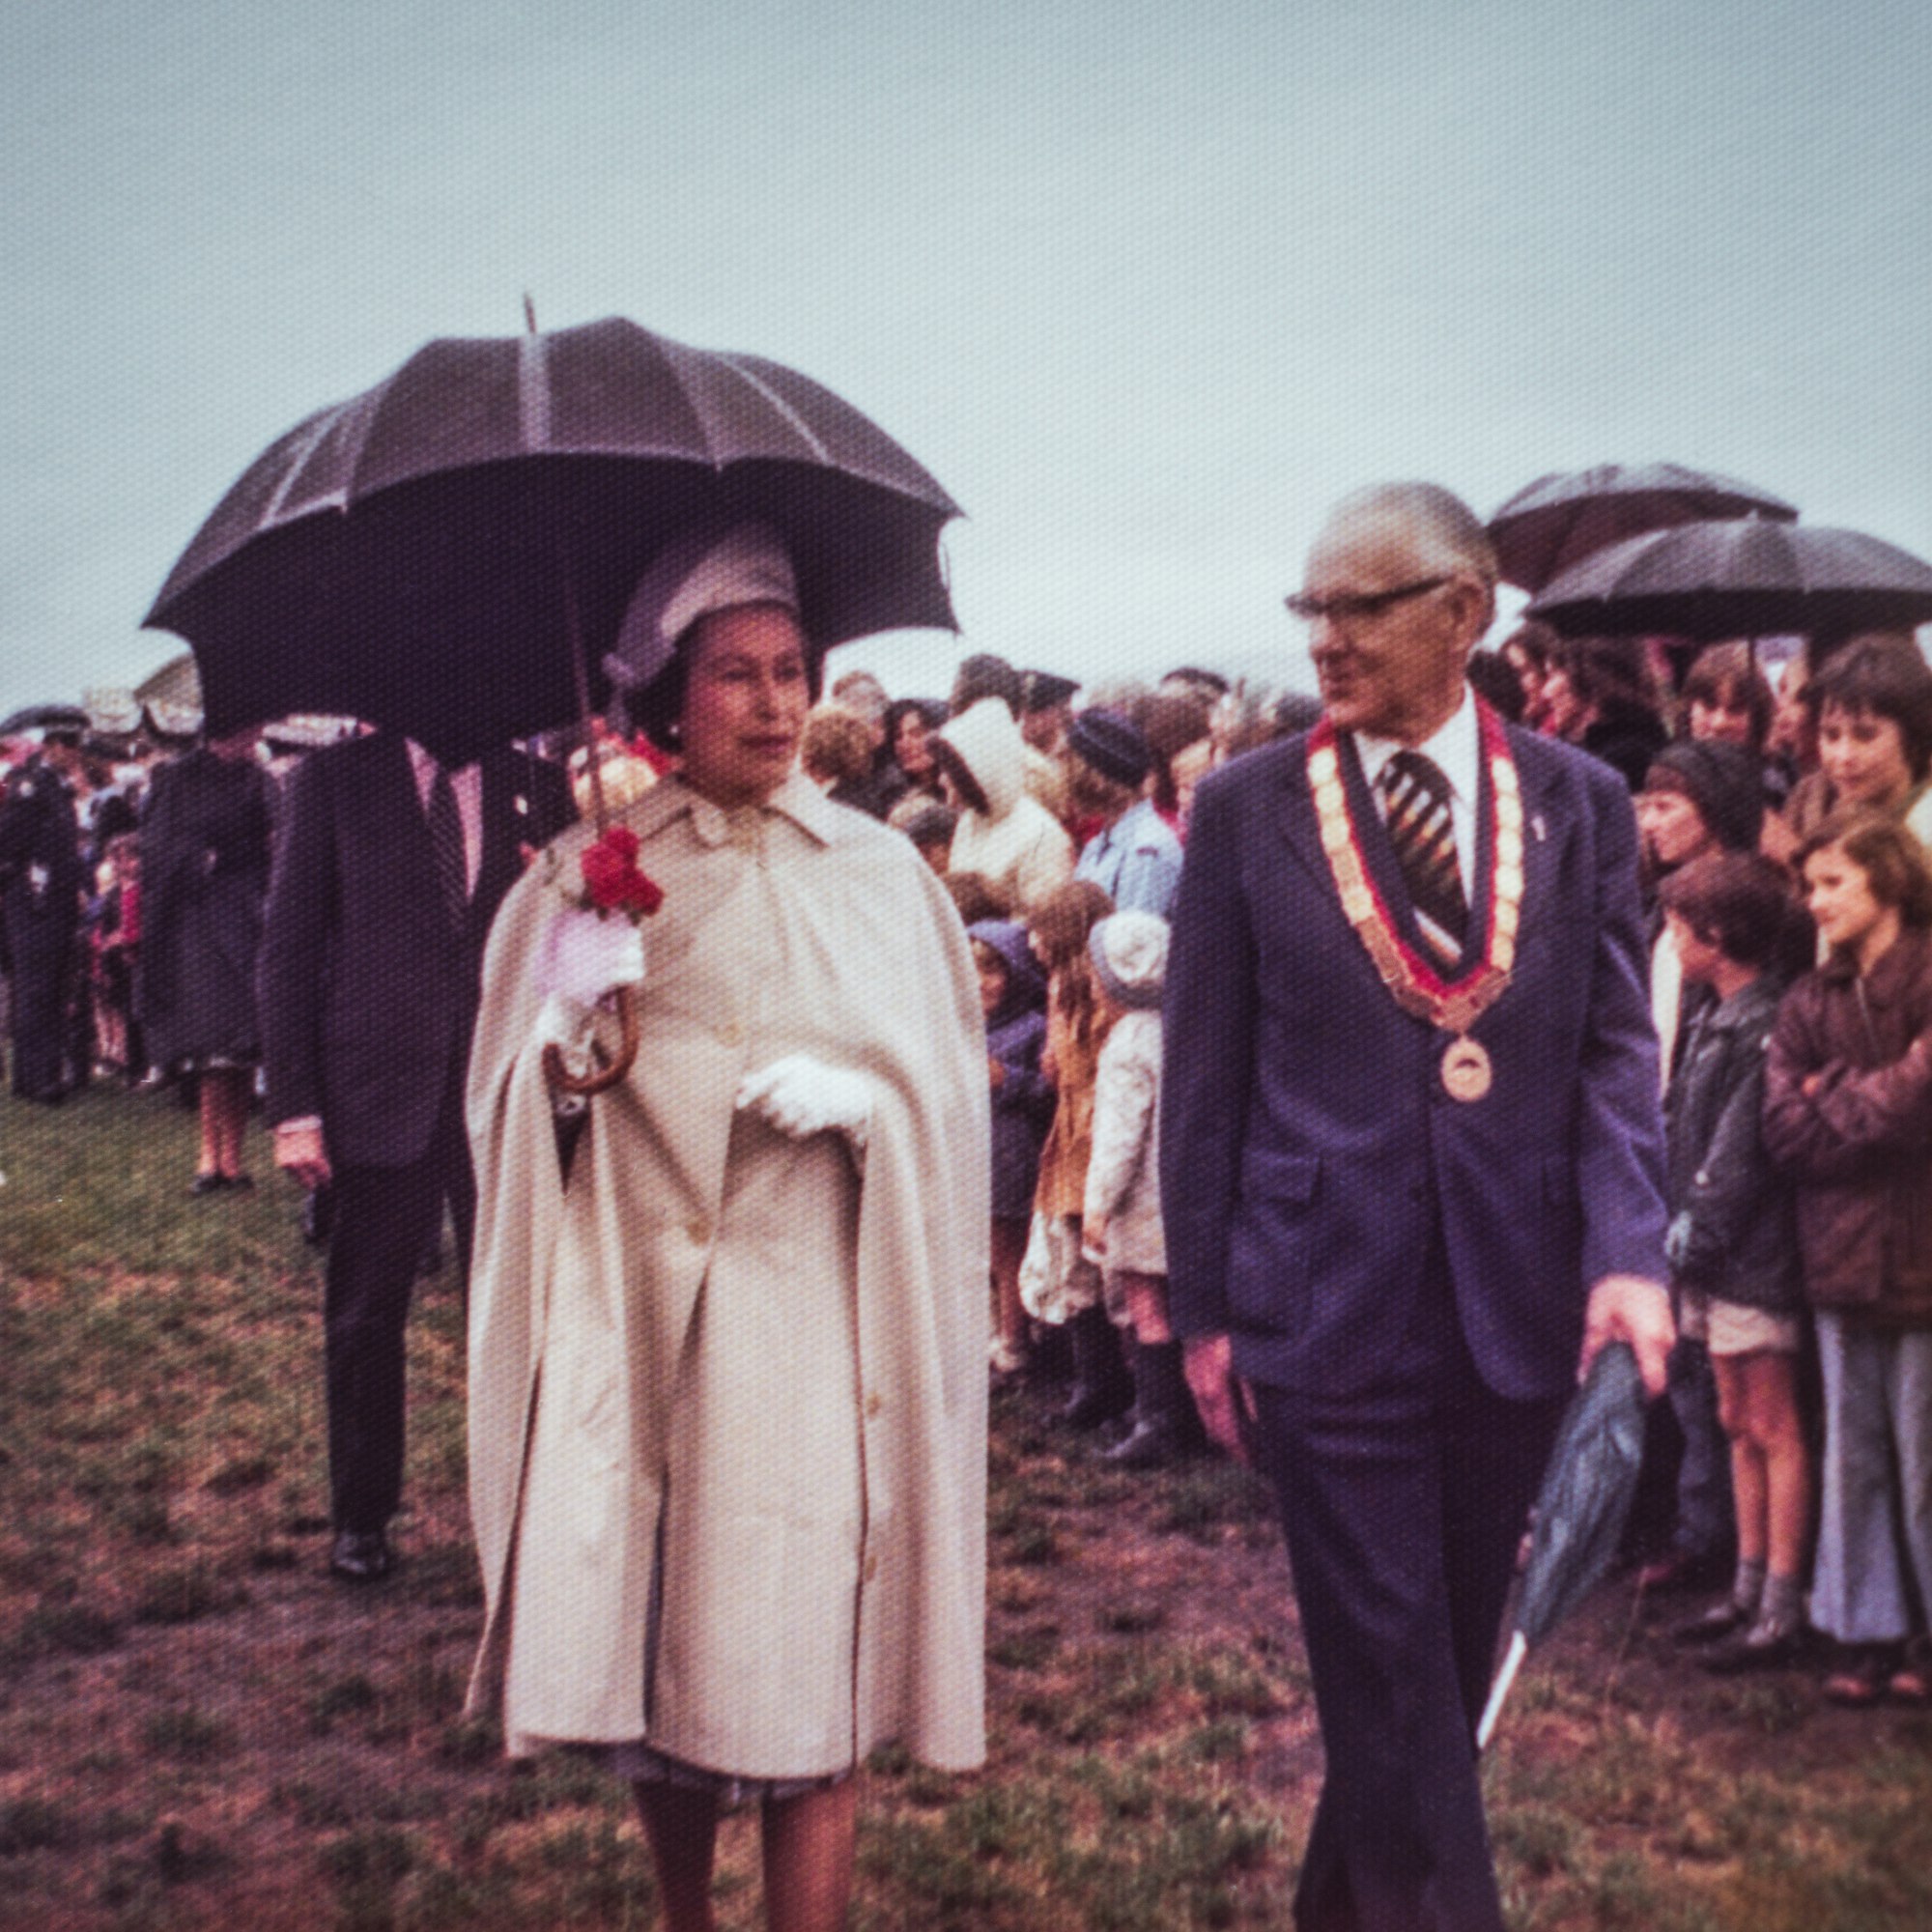 In 1977 my family moved for one year to New Zealand from the United States. That happened to be the Silver Jubilee year, celebrating 25 years of Queen Elizabeth II's reign, and she visited the Commonwealth countries as part of the celebration. I snapped this photo at the Blenheim airport as a 12-year-old. God save the Queen!